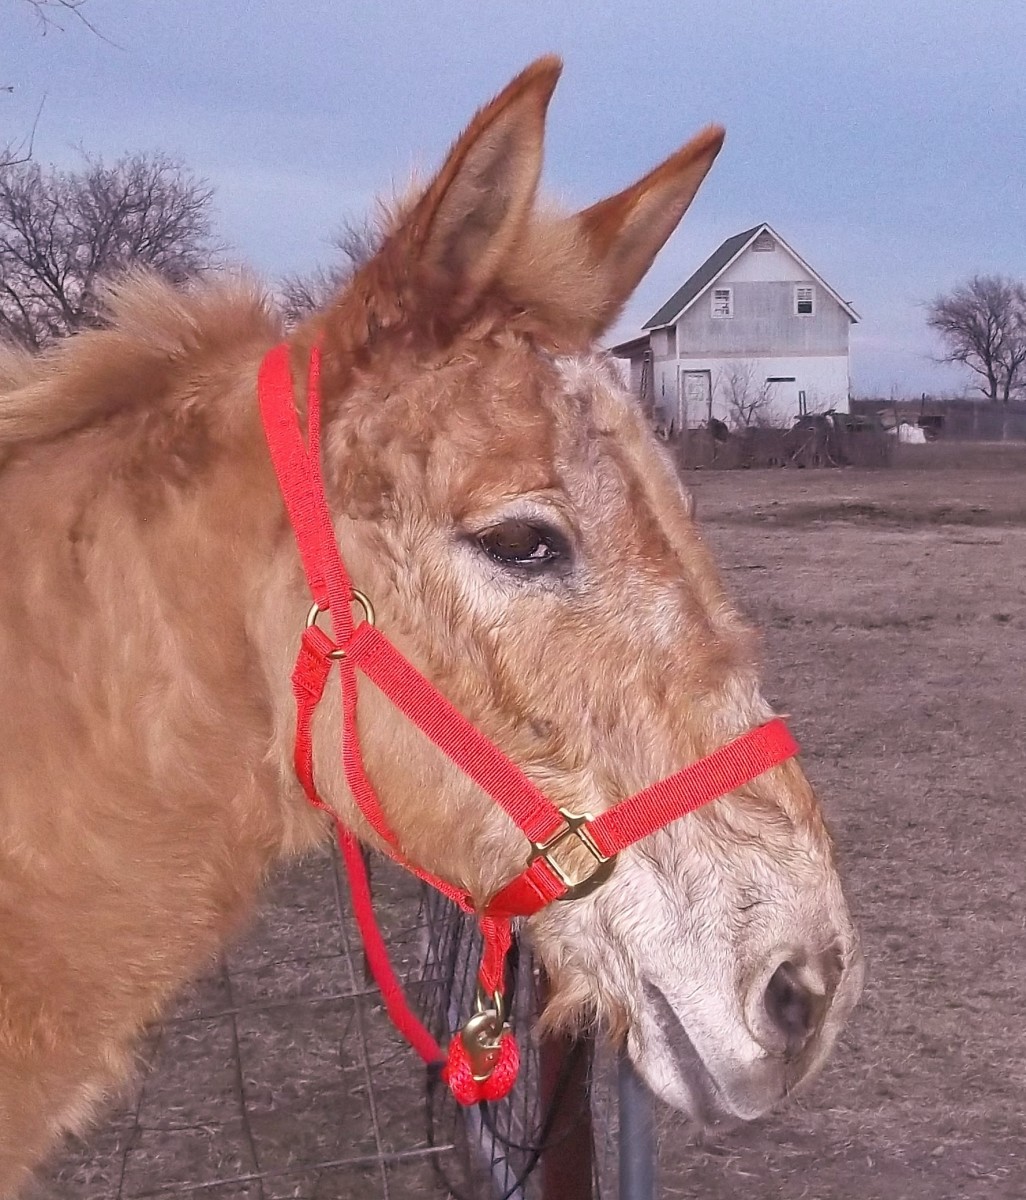 Rojo's new halter has an extra loop that attaches to the lead rope and goes over the head to encourage him to come along.